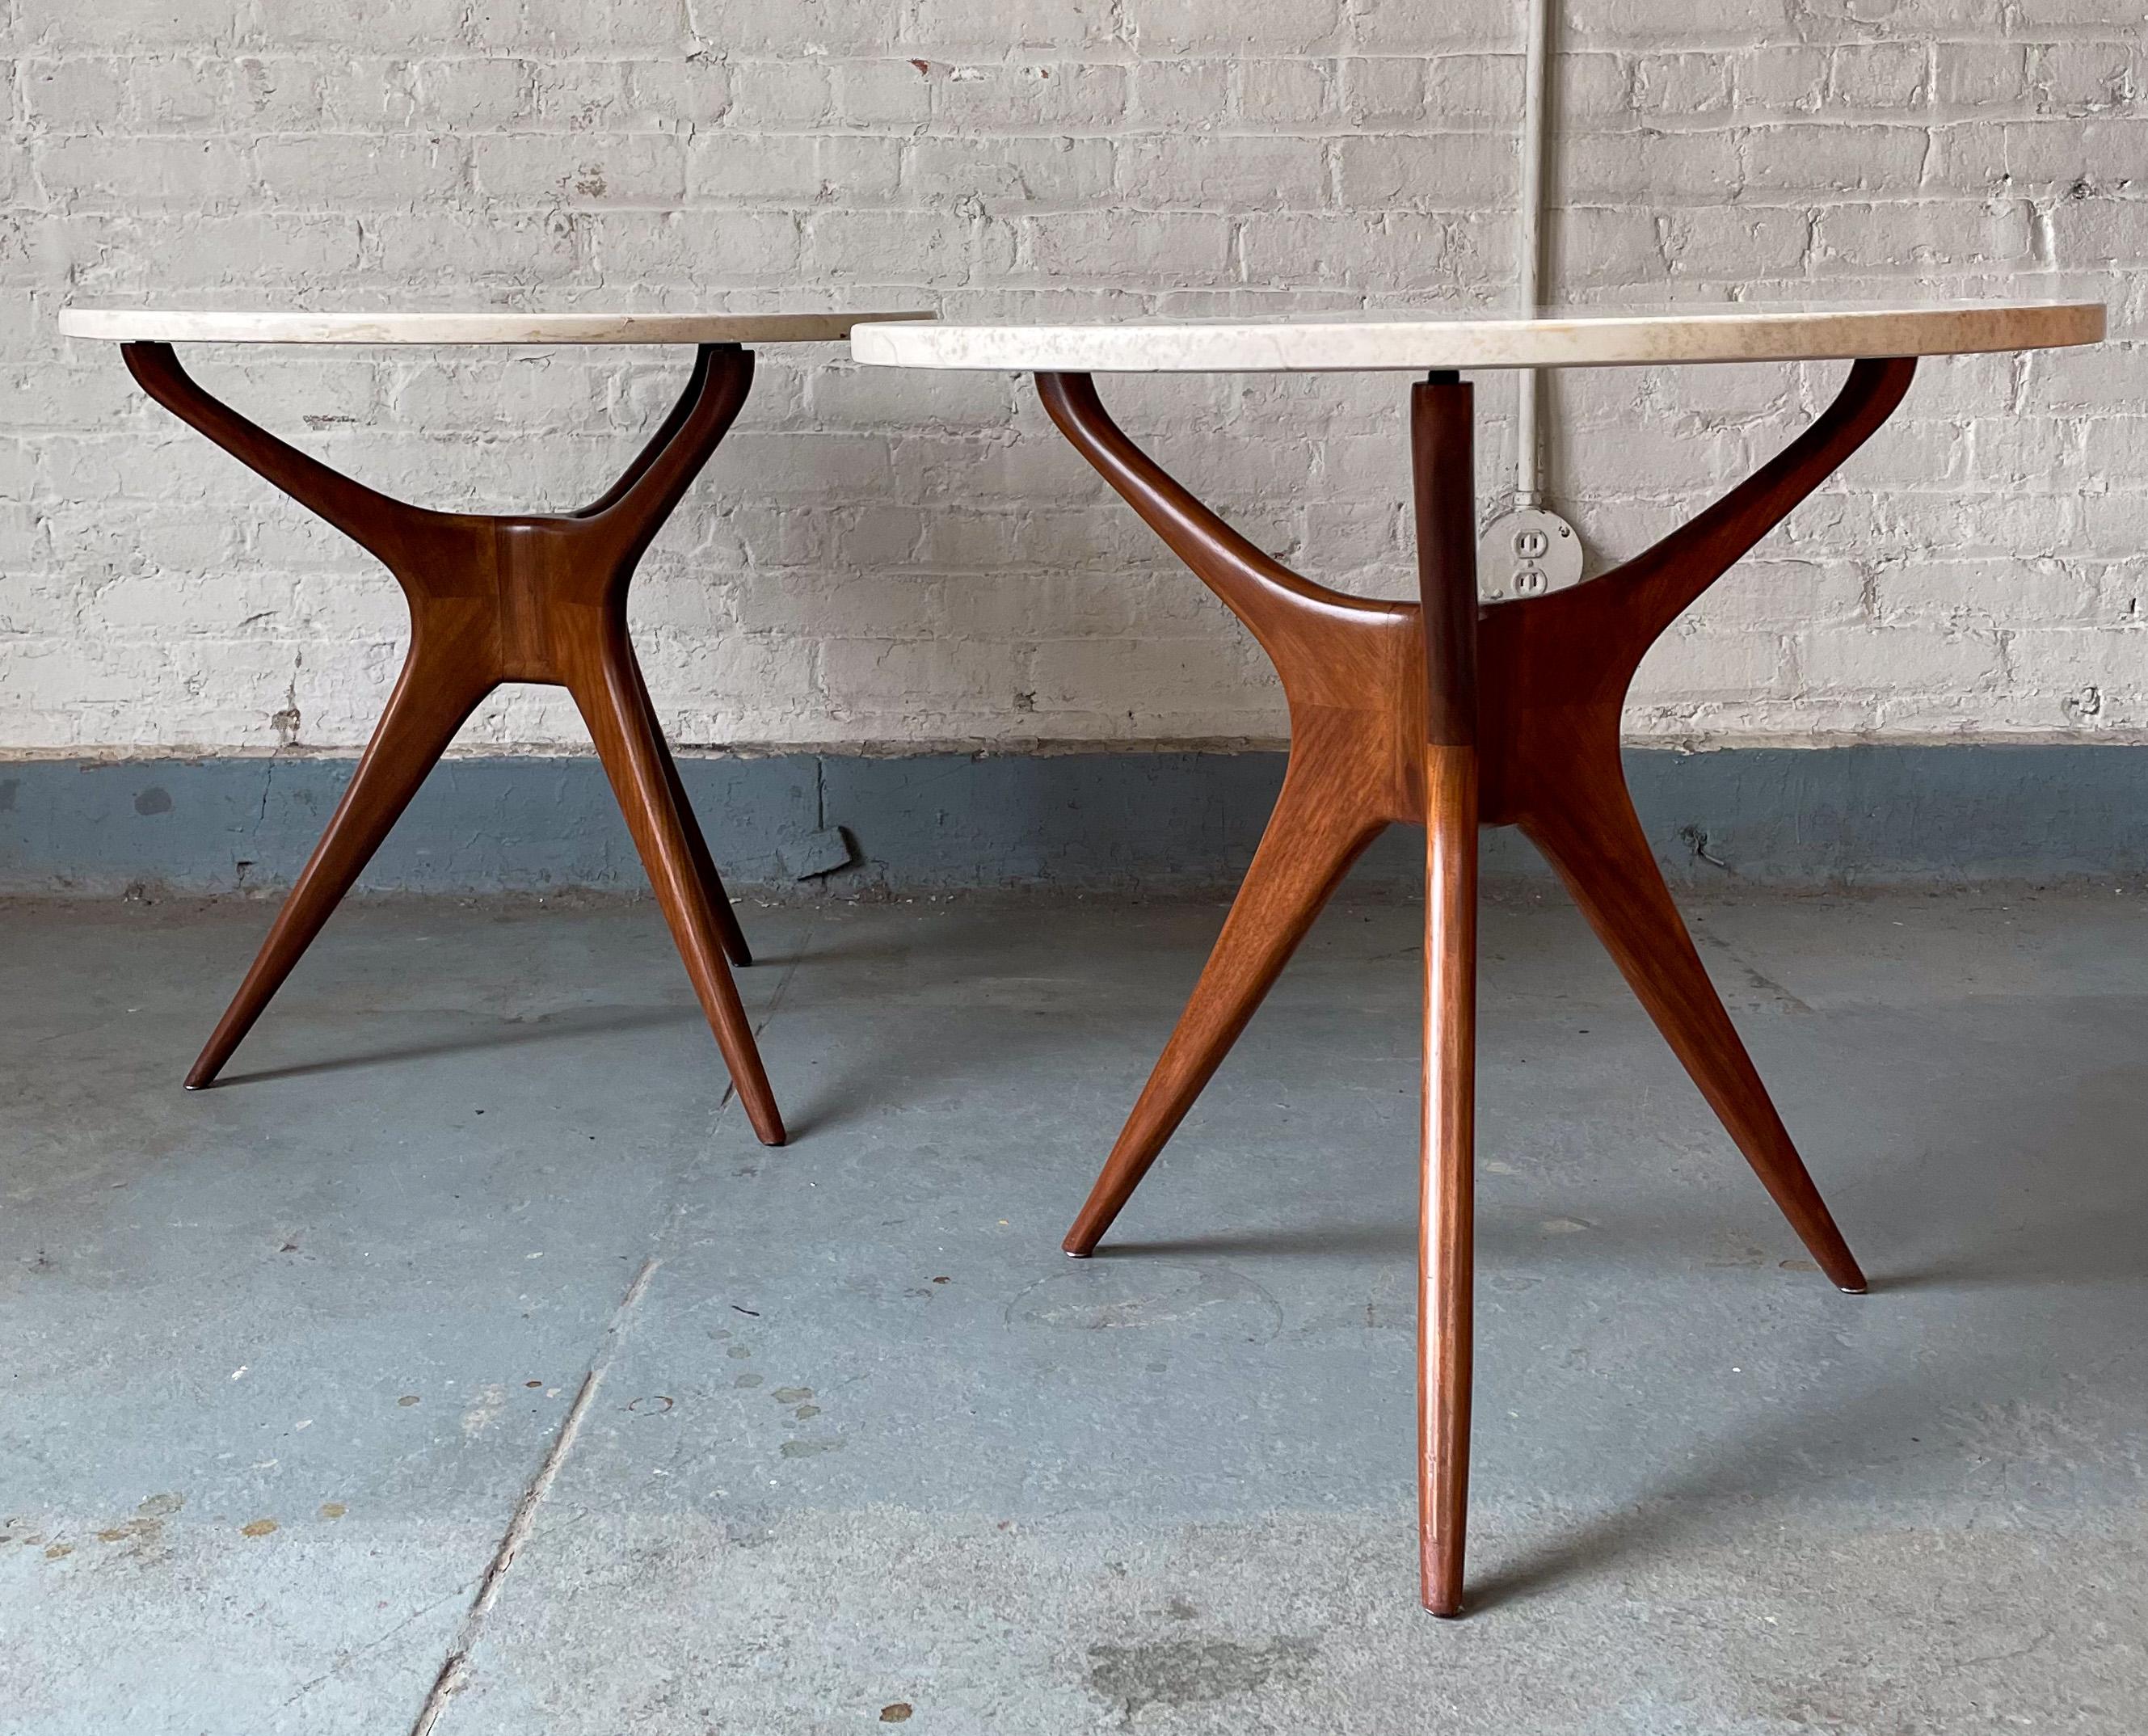 Pair of trisymmetric side tables in walnut with round Travertine marble tops. In the manner of Vladimir Kagan, produced late 20th century. A good quality production, with nicely figured wood and good polished marble, but not jointed the same as a